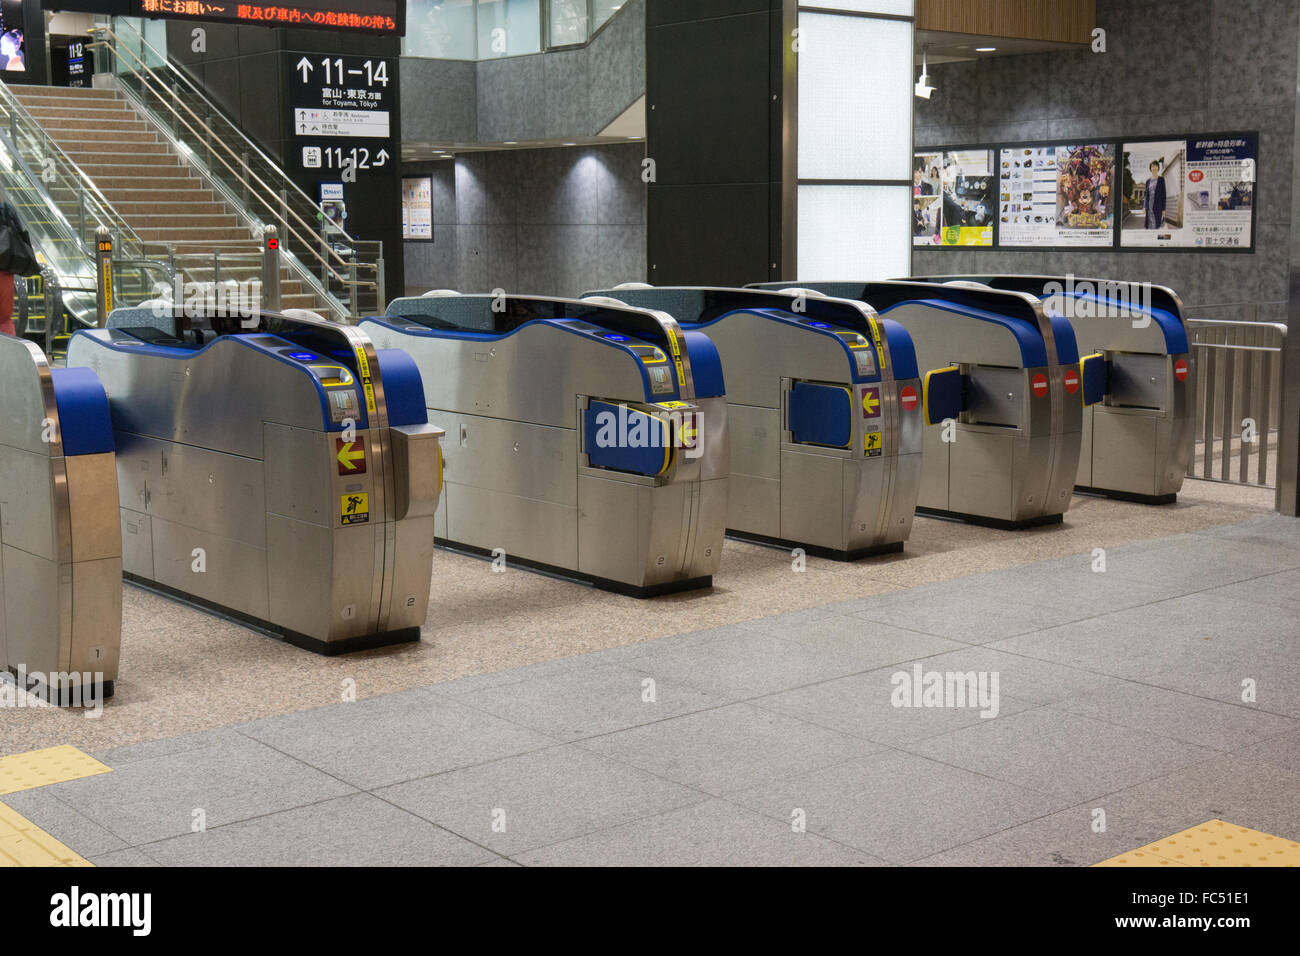 Japan automated turnstiles at train station Stock Photo